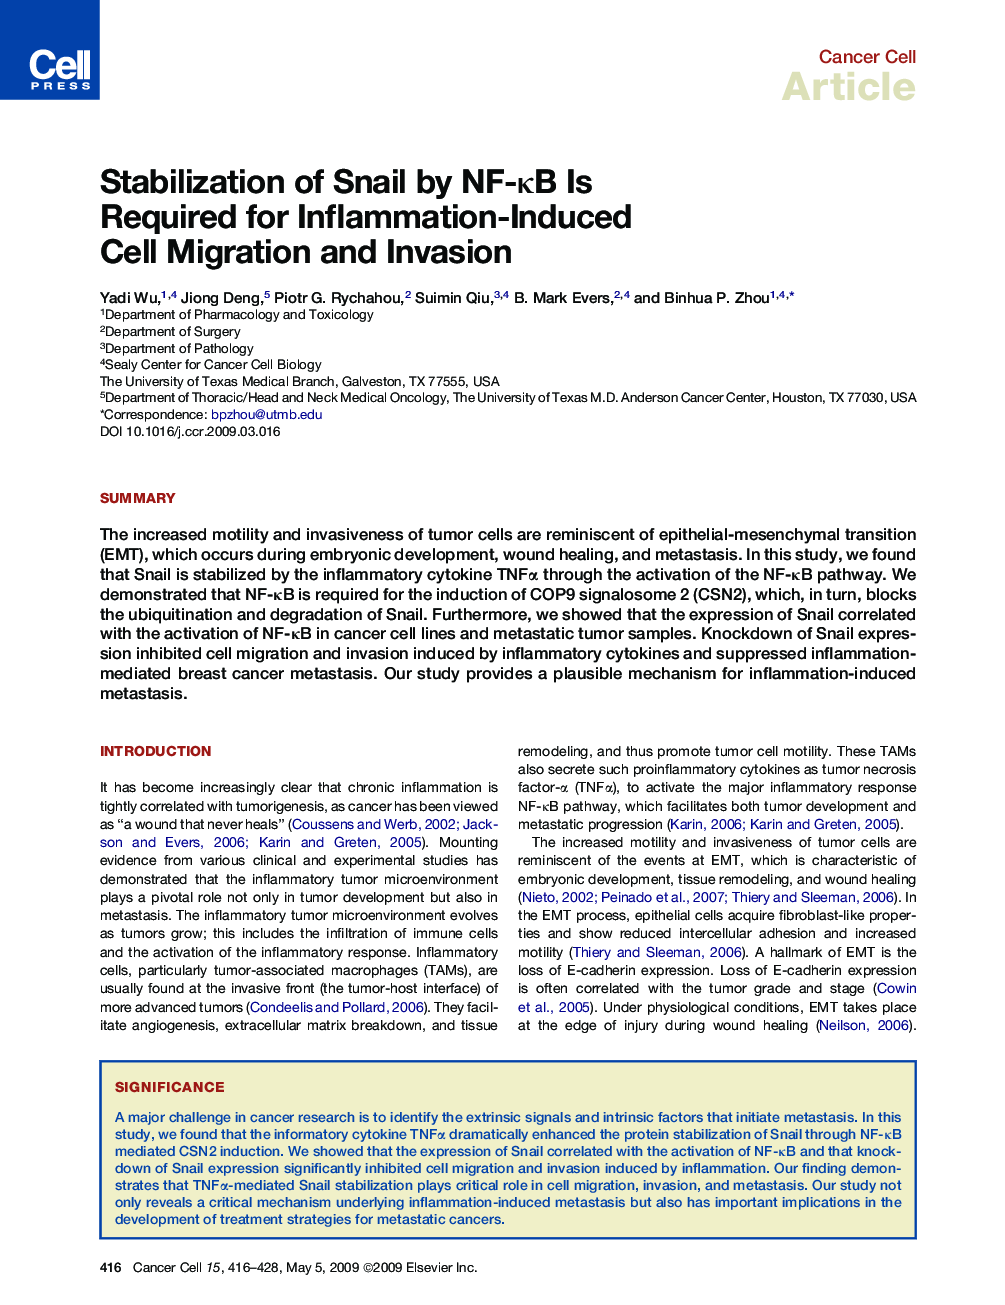 Stabilization of Snail by NF-κB Is Required for Inflammation-Induced Cell Migration and Invasion